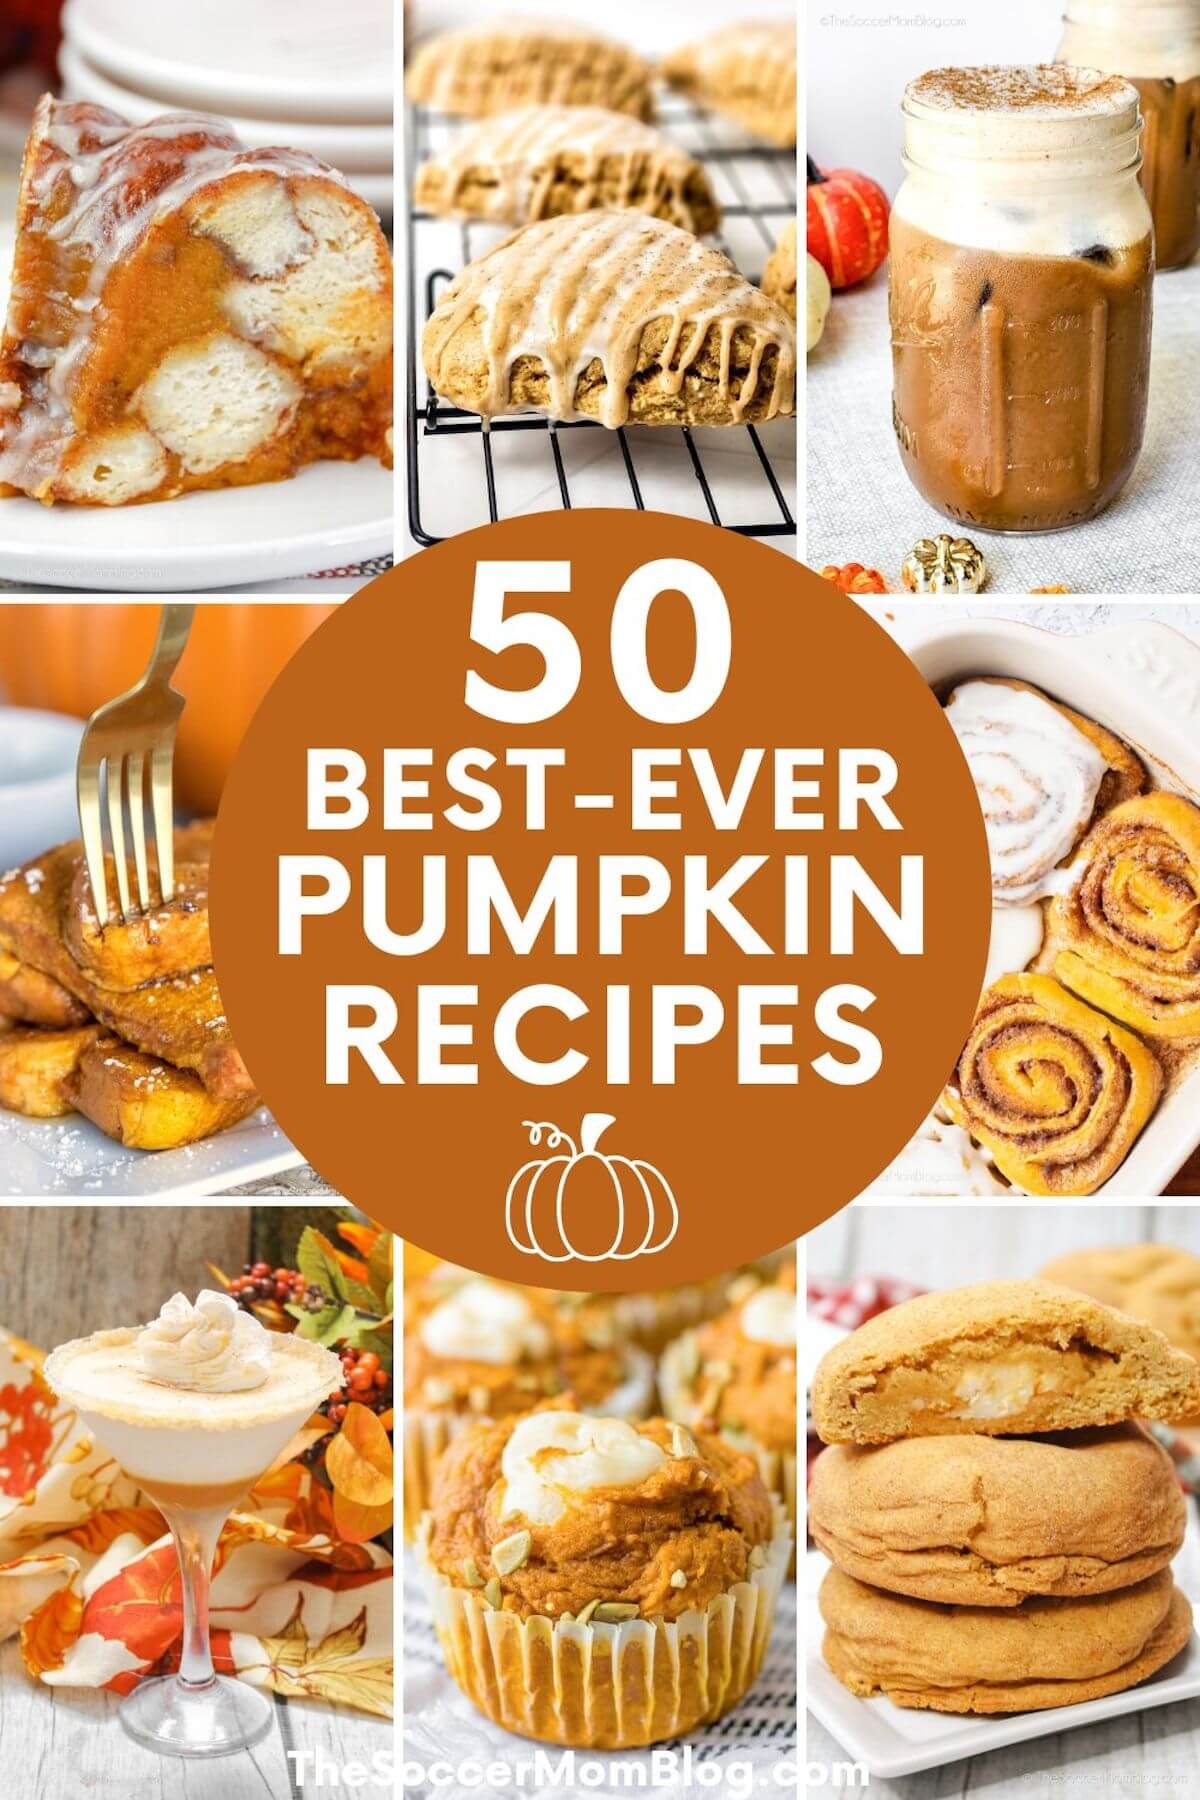 collage of pumpkin flavored recipes; text overlay "50 Best-Ever Pumpkin Recipes"